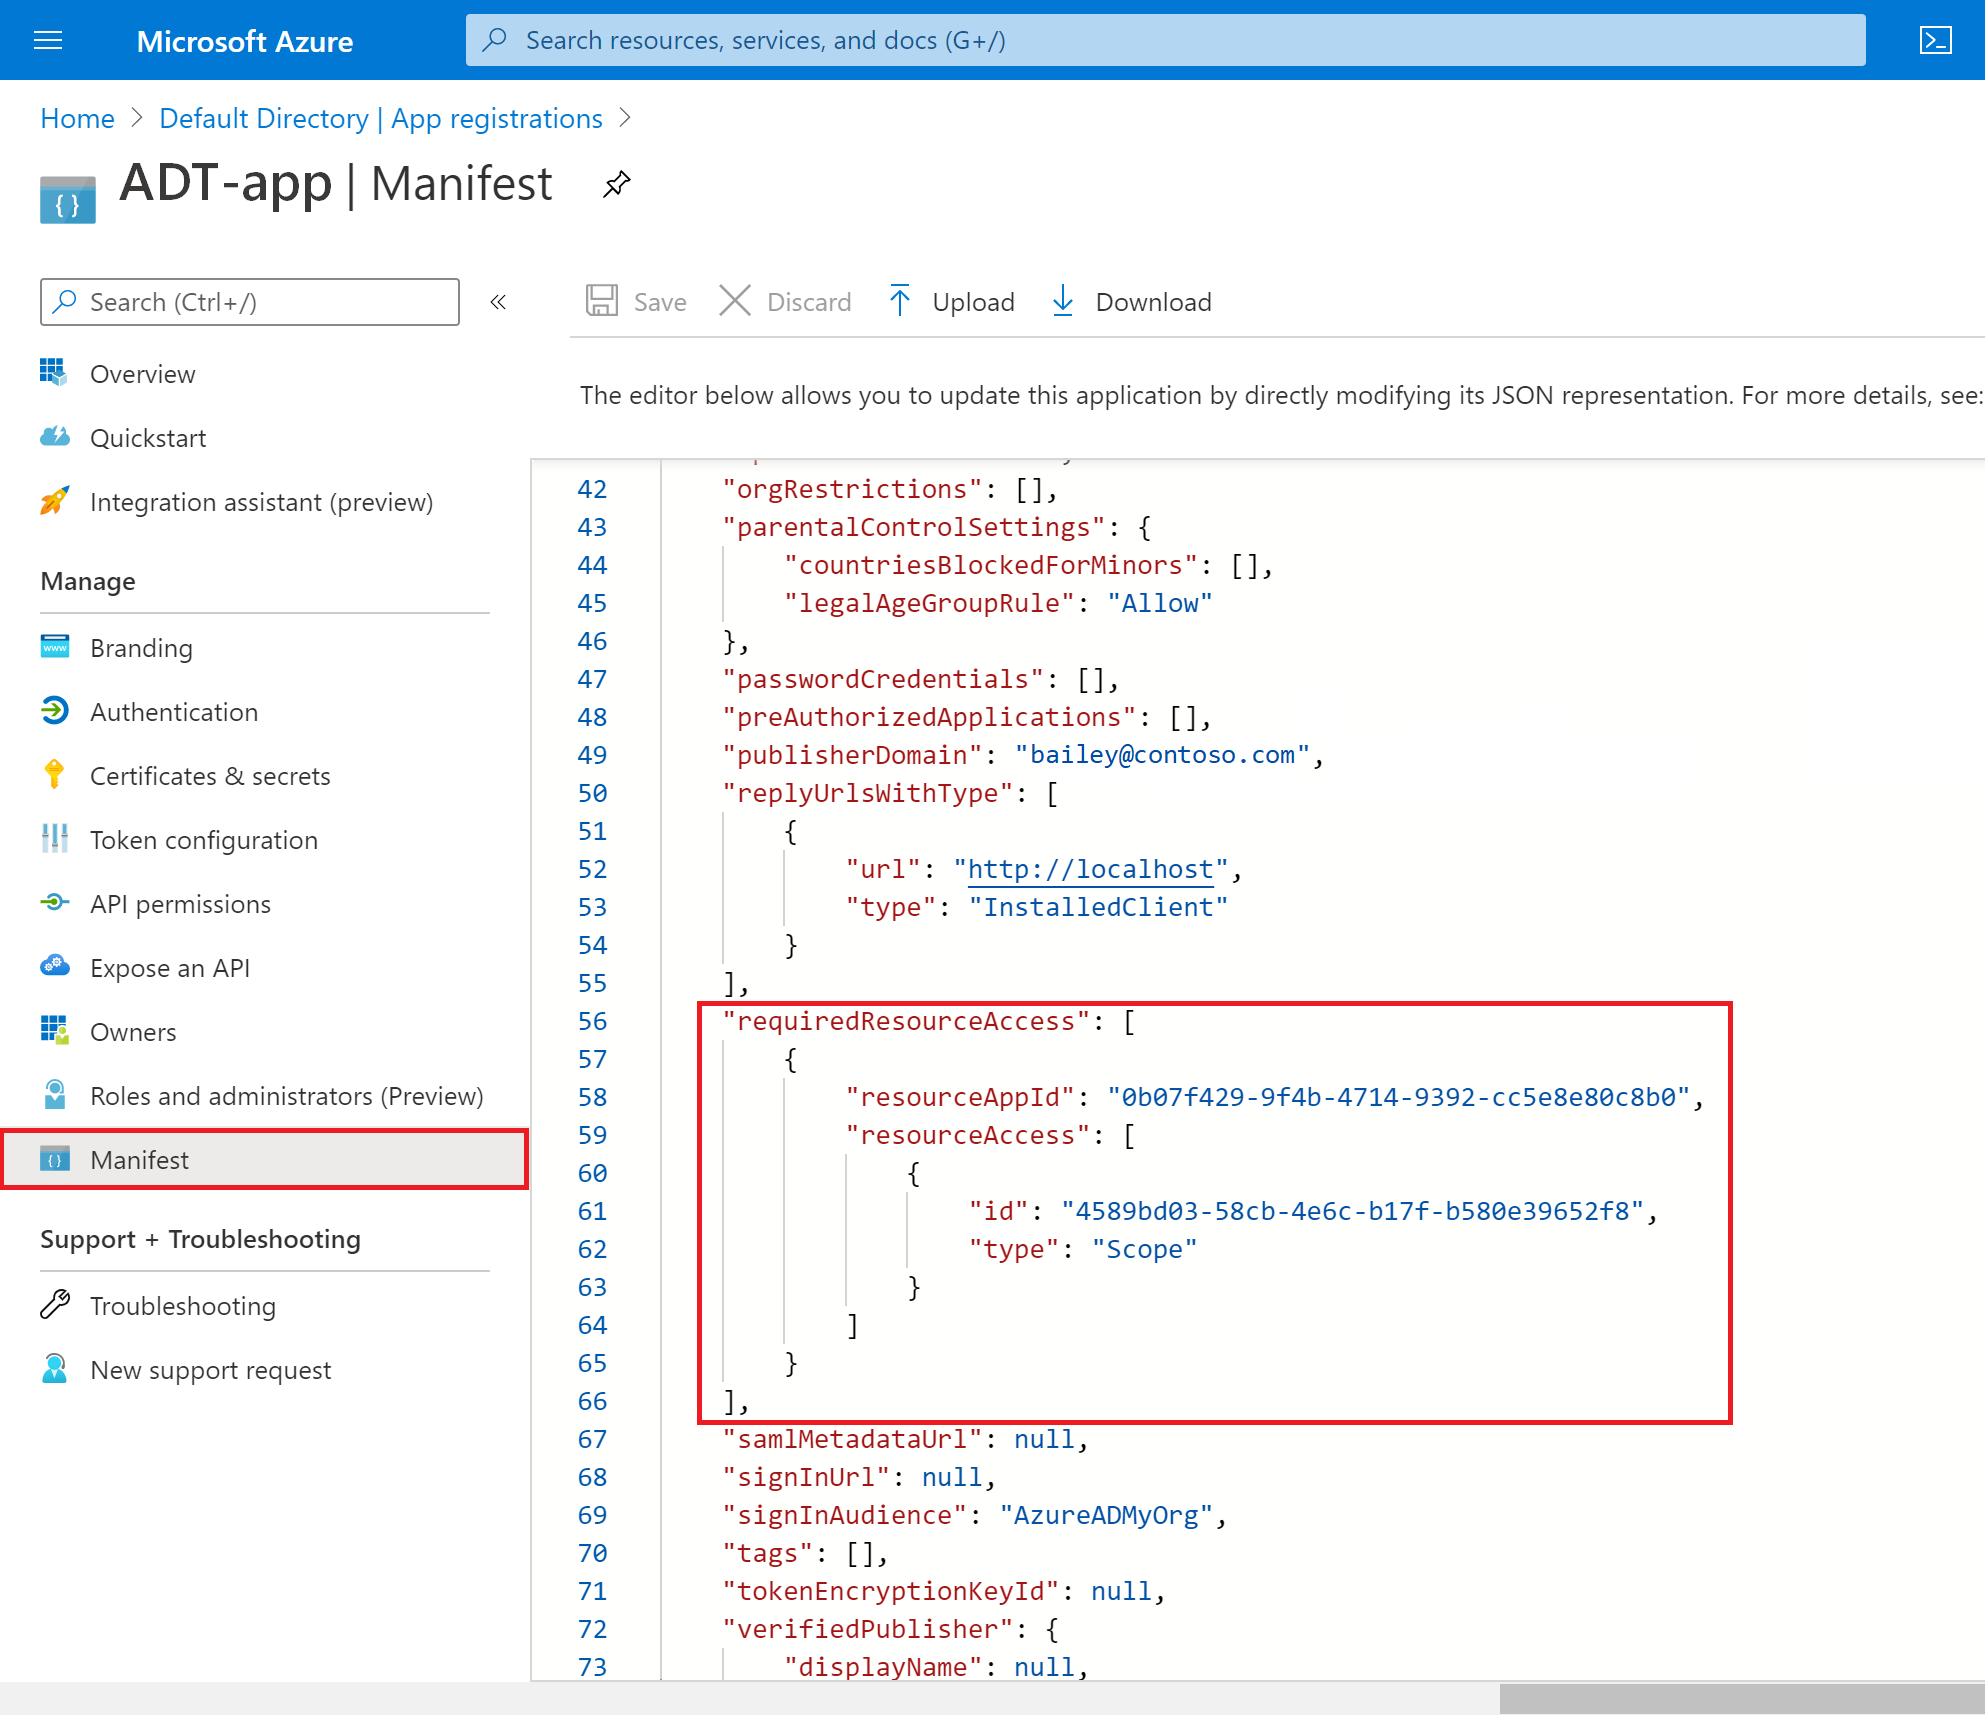 Screenshot of the manifest for the Azure AD app registration in the Azure portal.